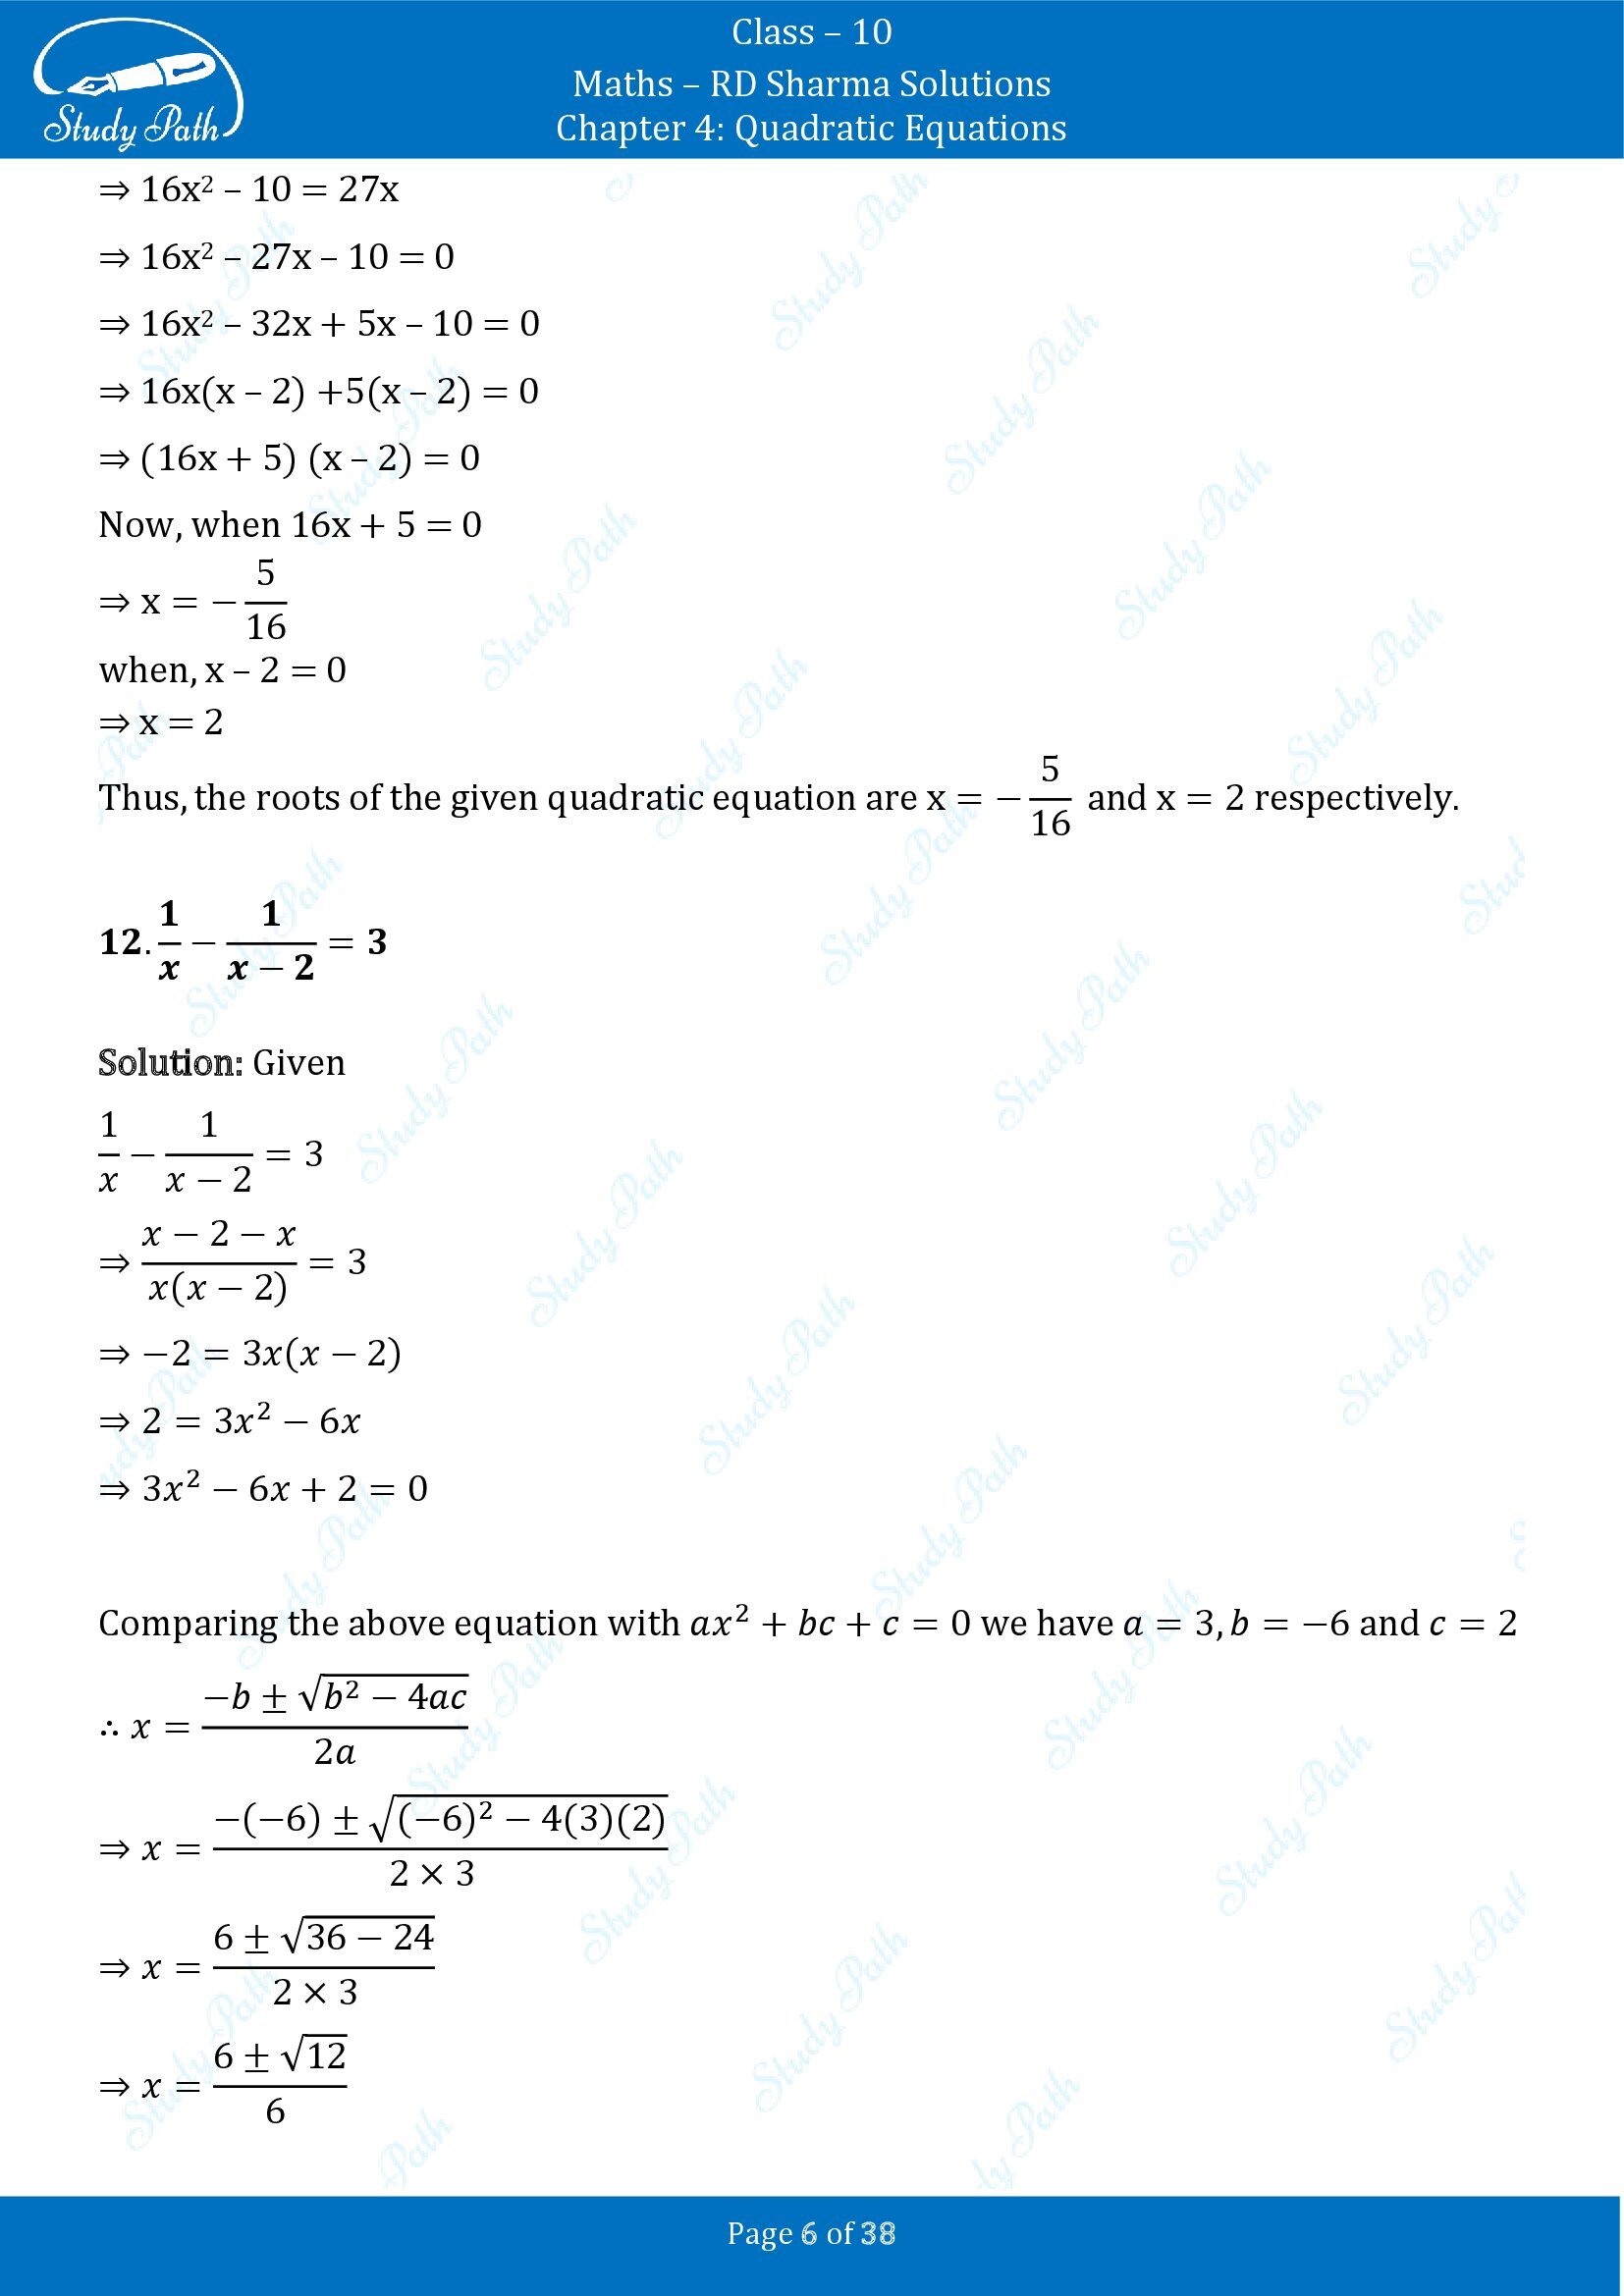 RD Sharma Solutions Class 10 Chapter 4 Quadratic Equations Exercise 4.3 00006